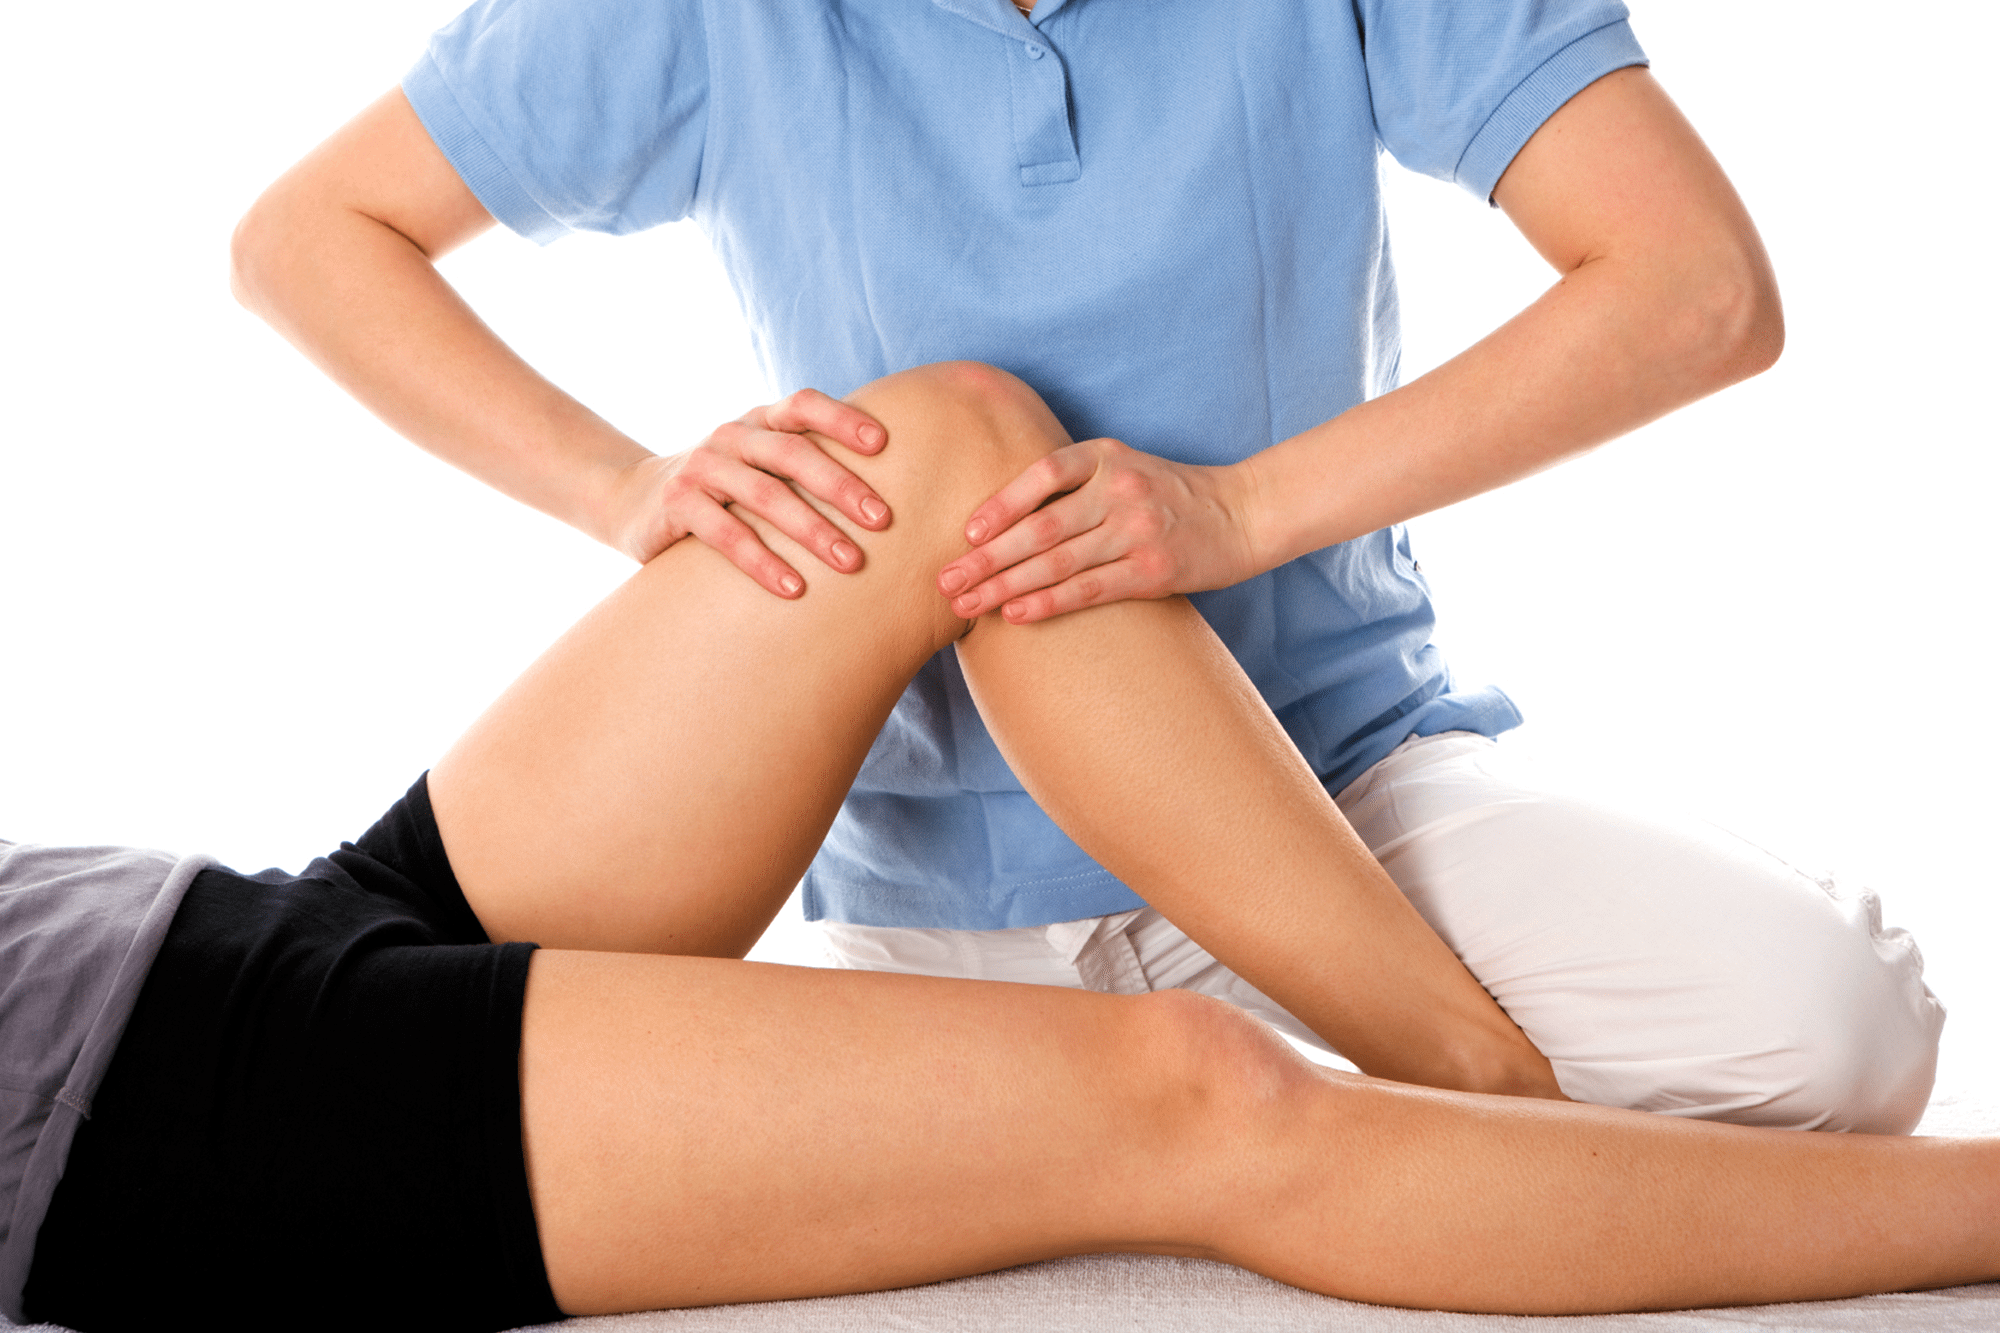 How physiotherapy can help with pain relief and better mobility